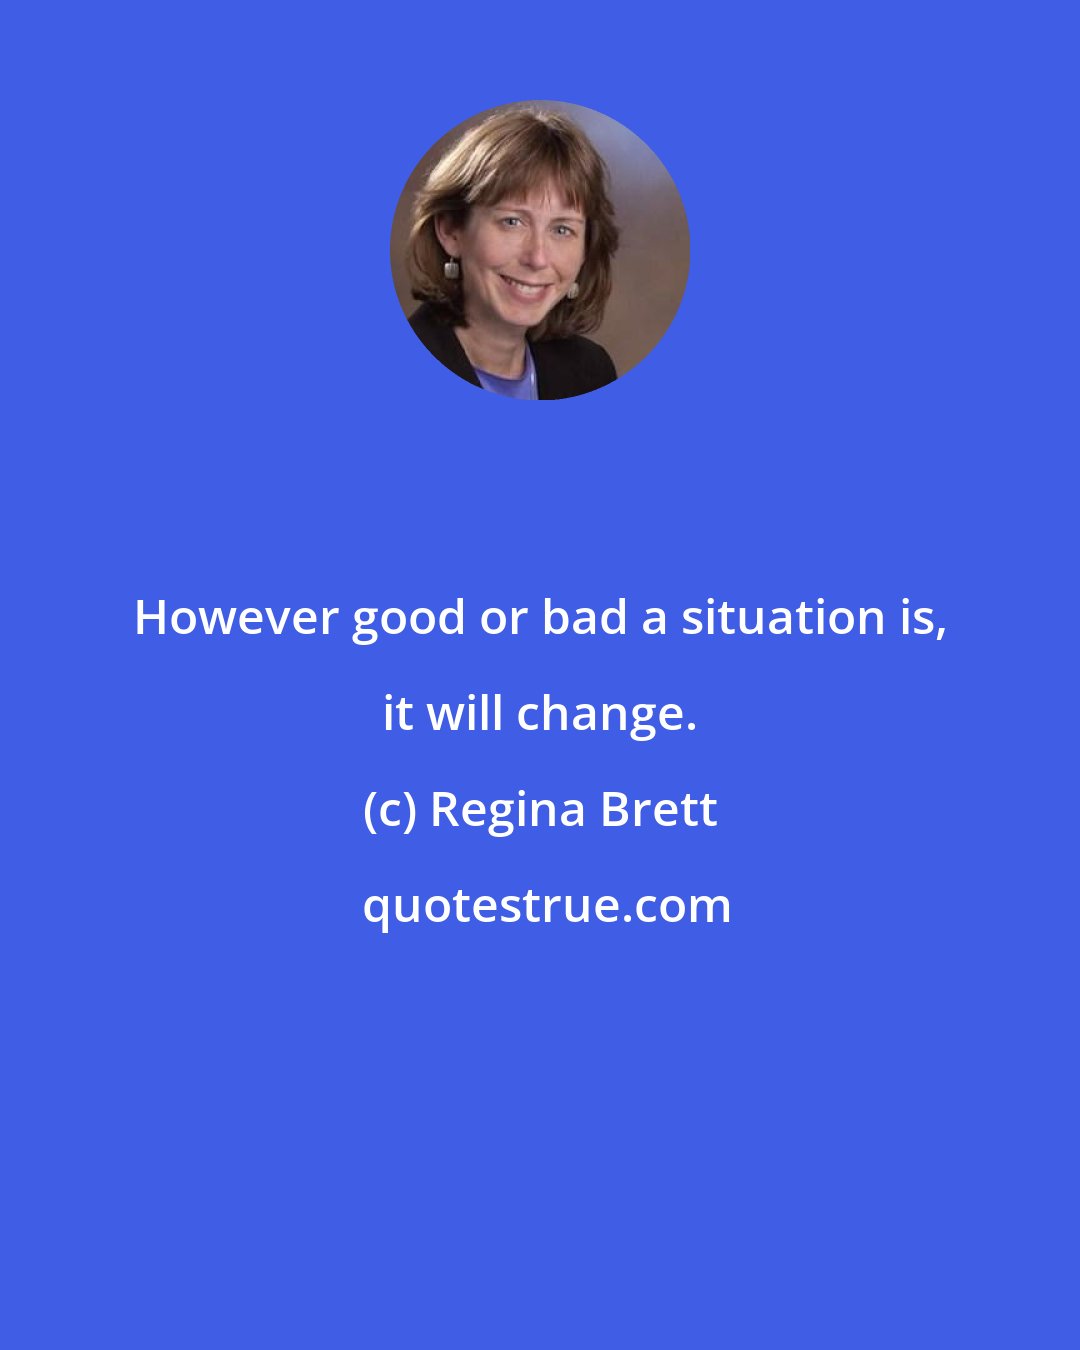 Regina Brett: However good or bad a situation is, it will change.